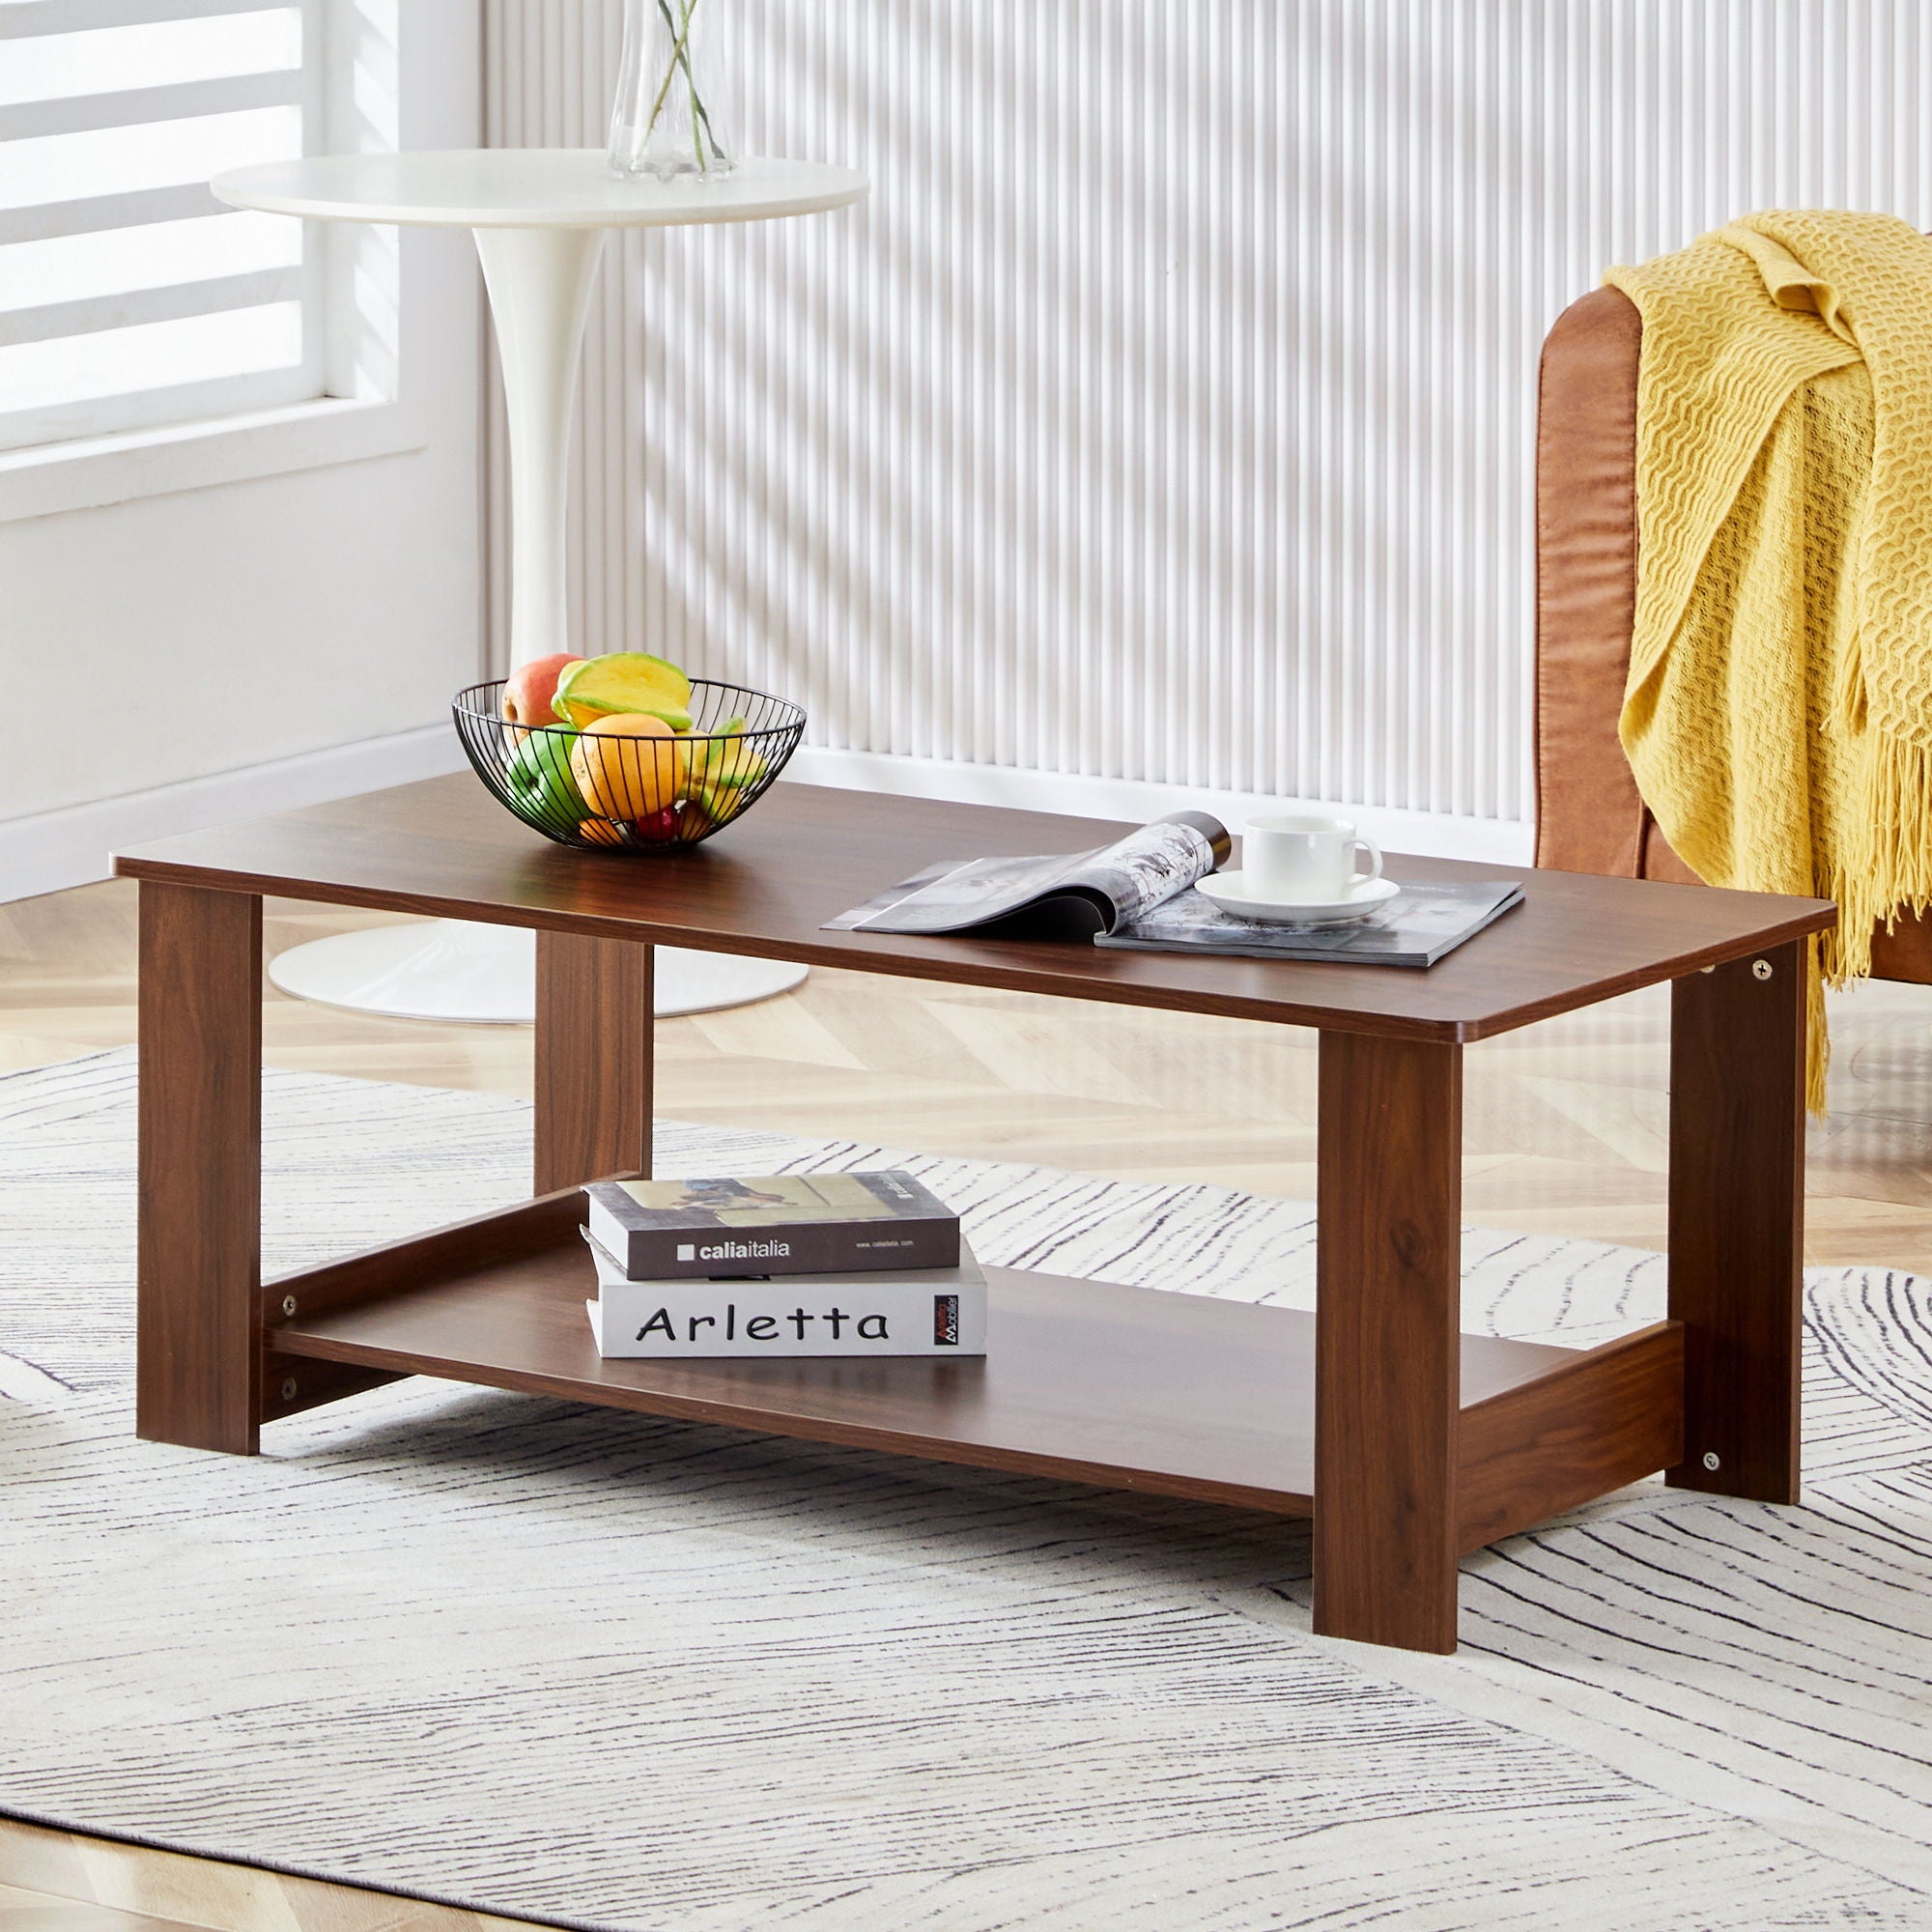 Modern And Practical Walnut Textured Coffee Tables, Tea Tables. The Double Layered Coffee Table Is Made Of MDF Material. Suitable For Living Room 43.3" *21.6" *16.5" Ct - 16